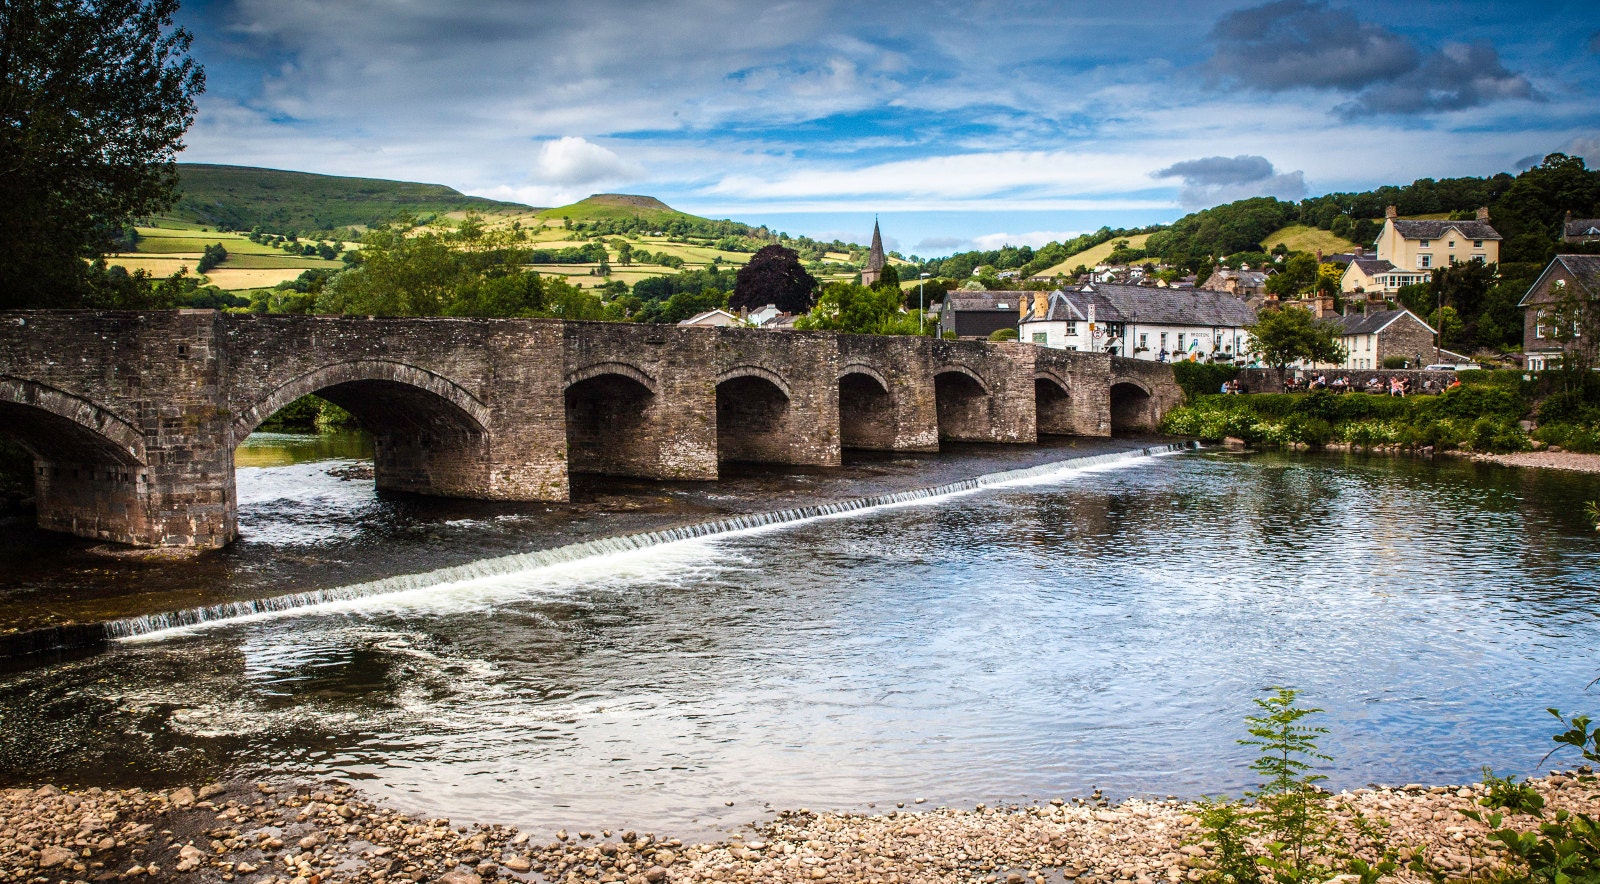 A long stone bridge stretches across a river. In the background are rolling green hills, blue sky and the top of a church steeple.